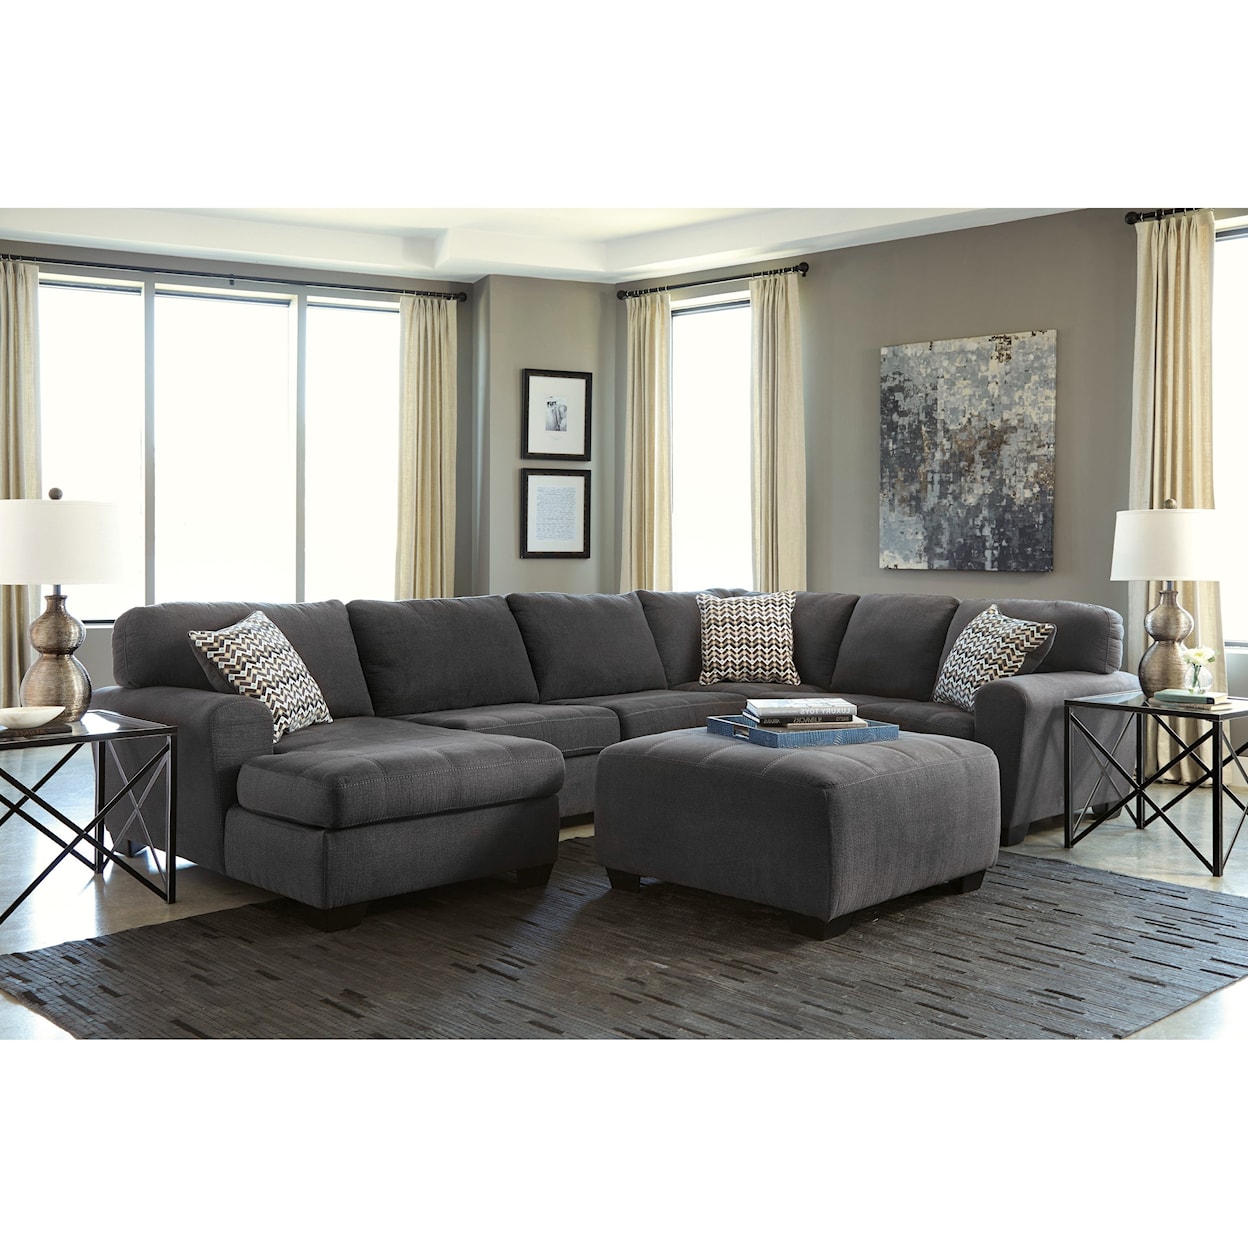 Ashley Furniture Benchcraft Ambee Living Room Group